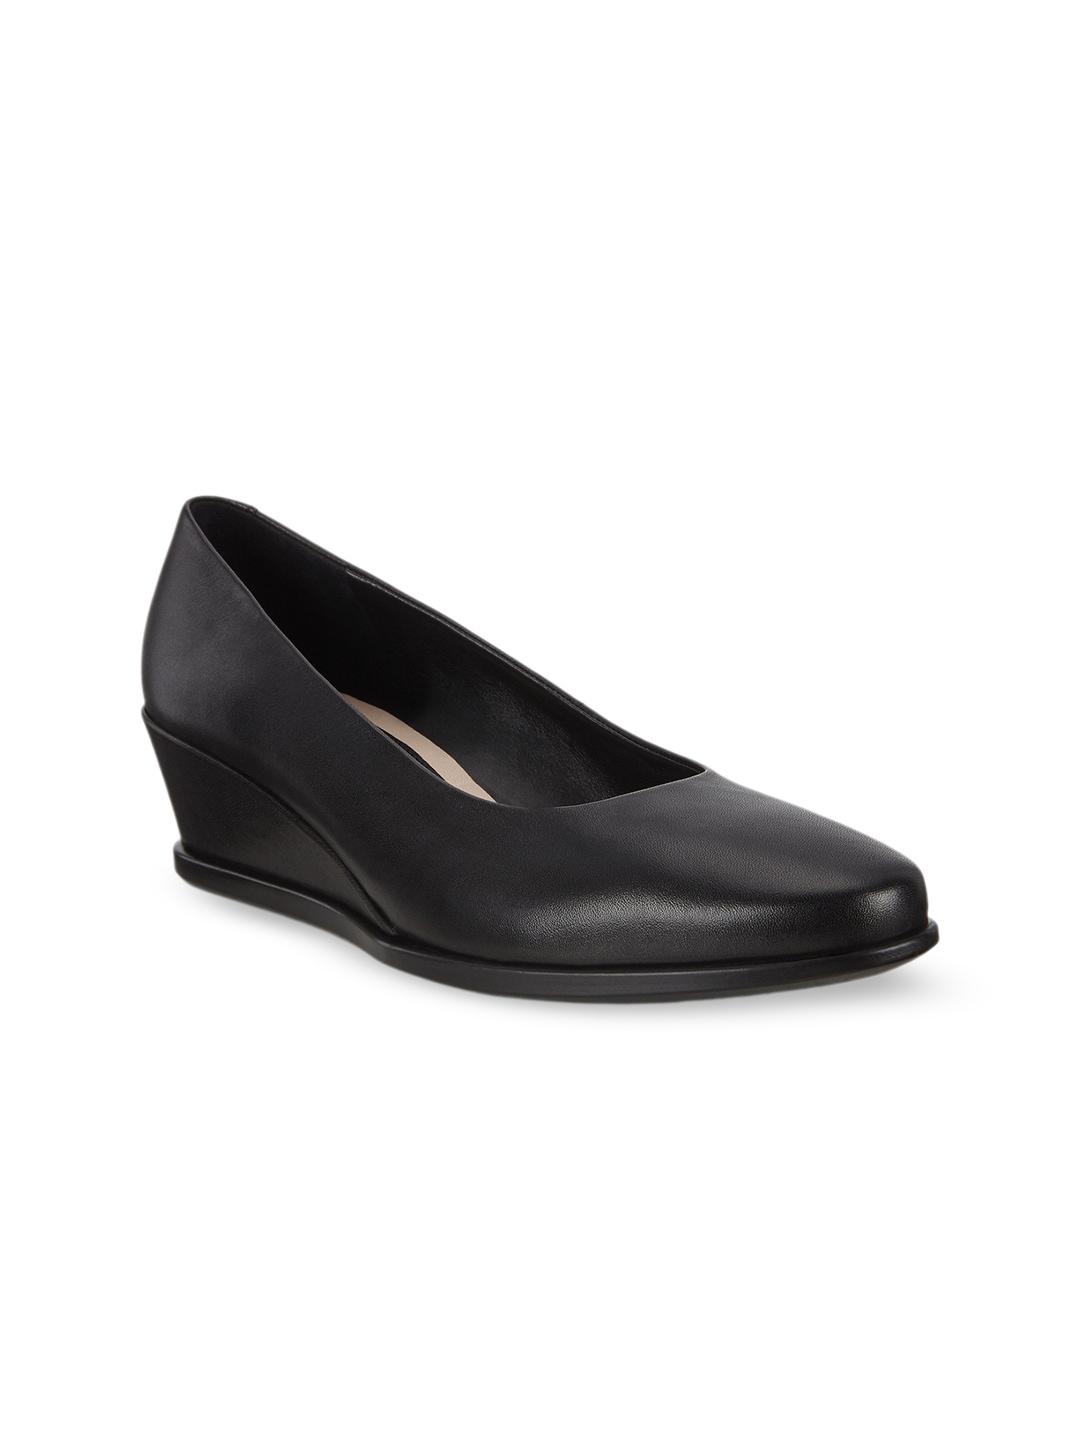 ECCO Leather Wedge Pumps With Closed Back